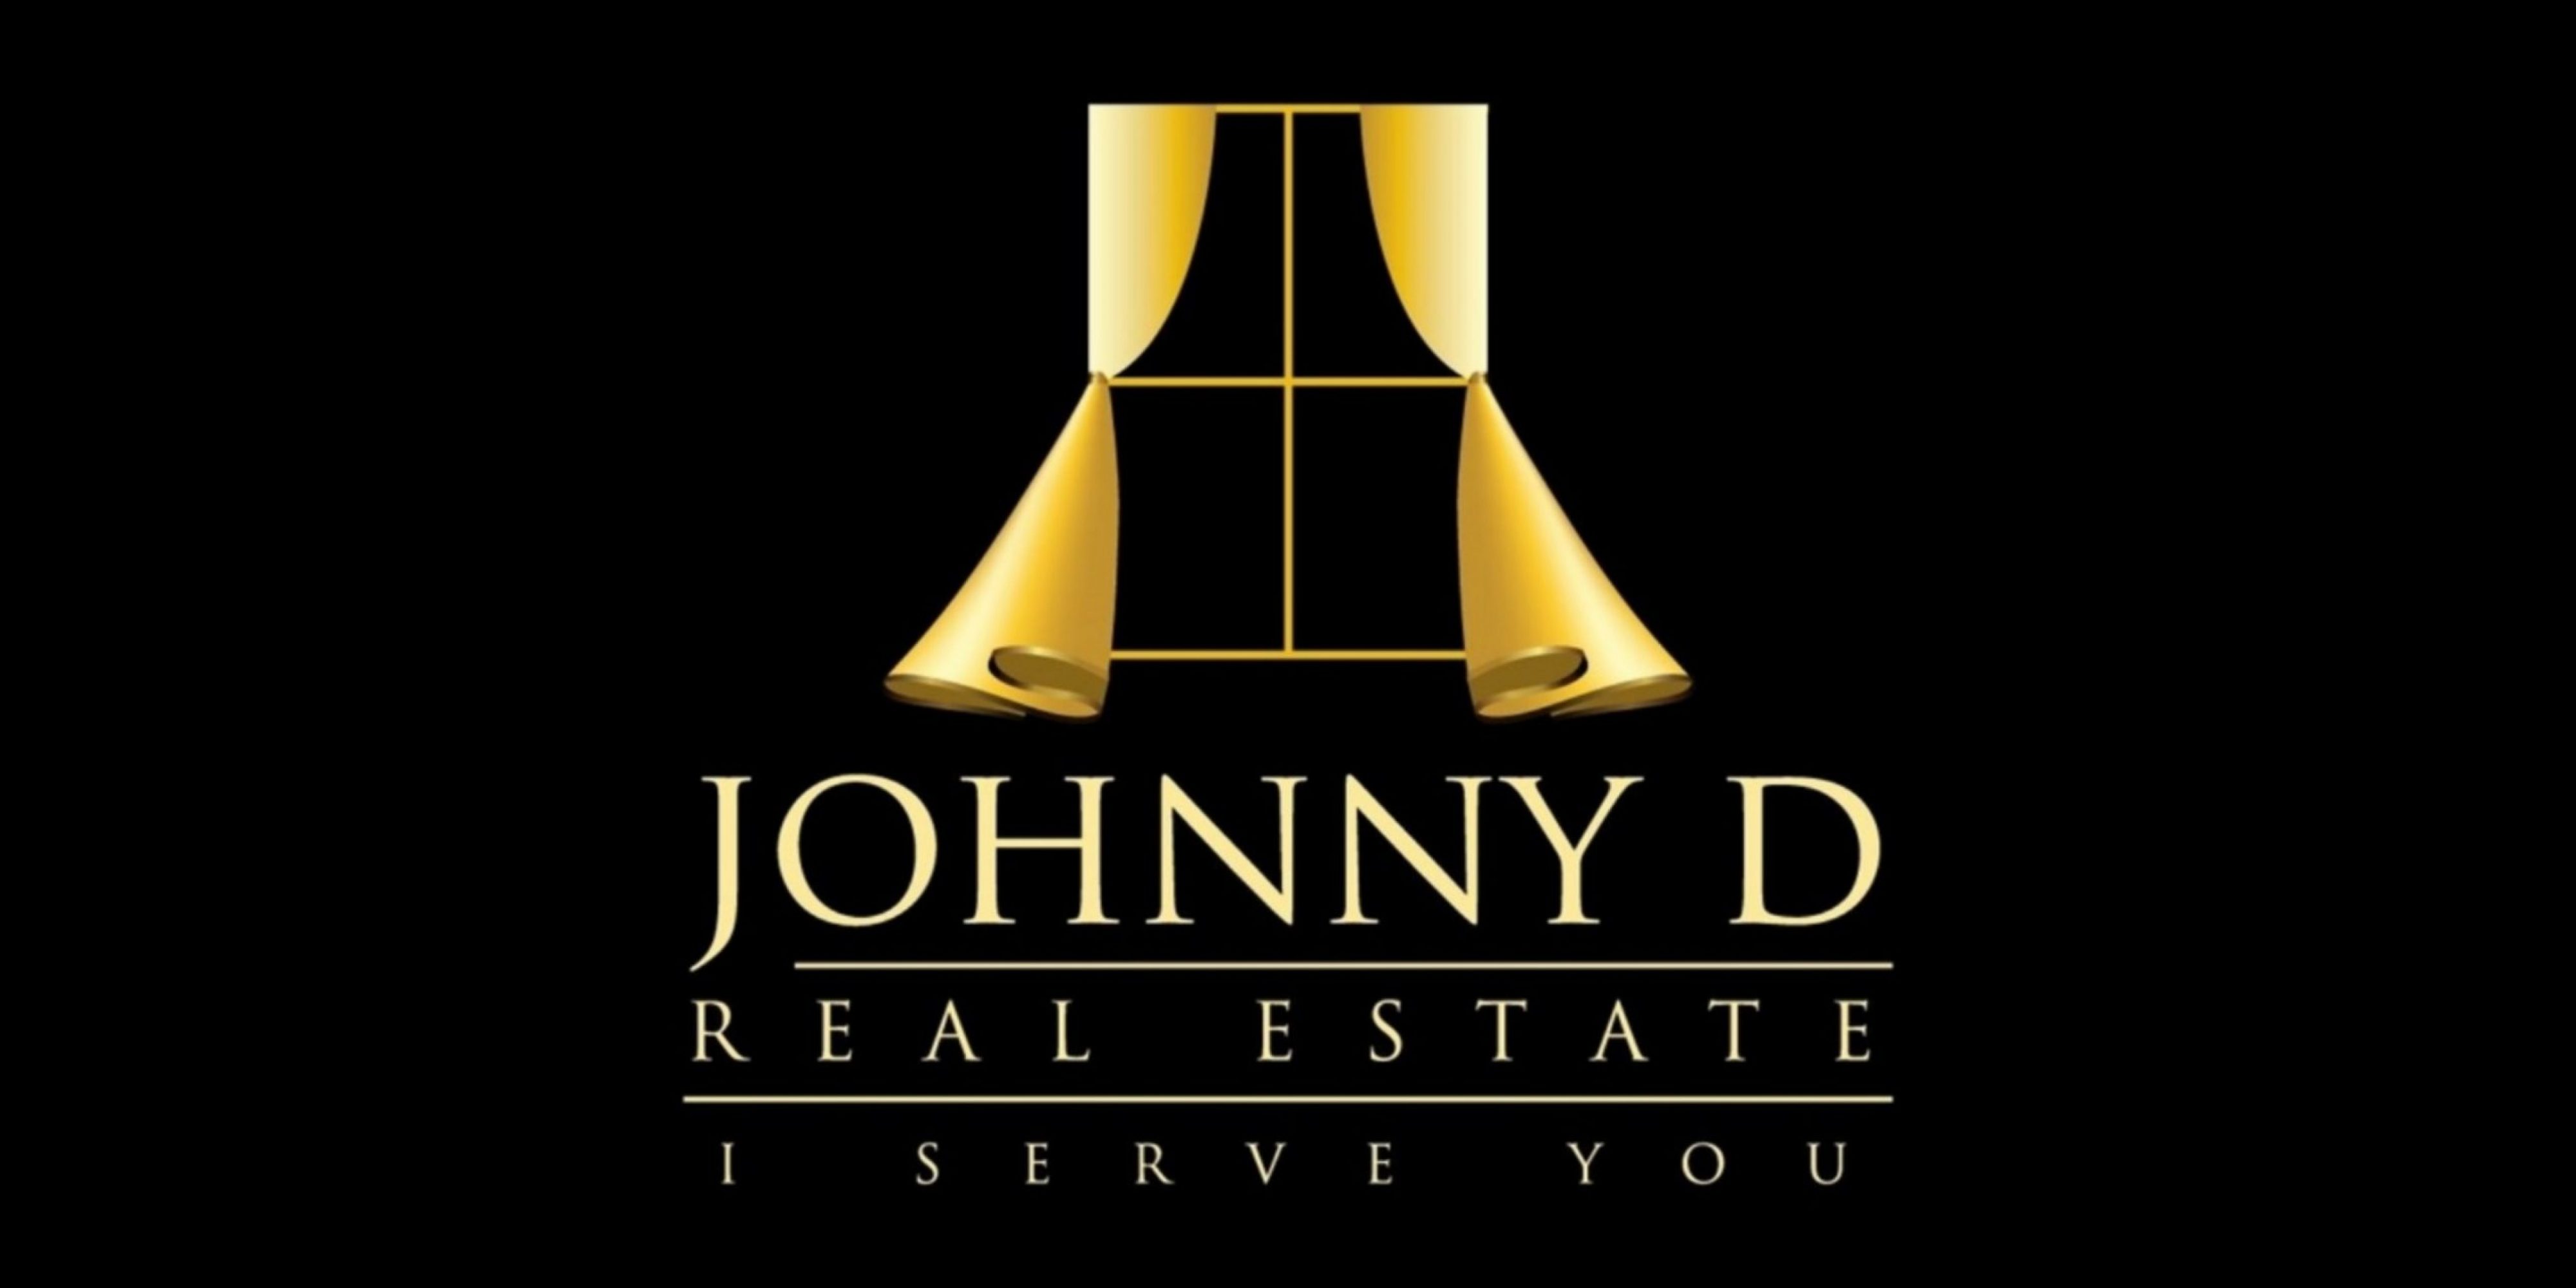 Real Estate Agent in Scottsdale